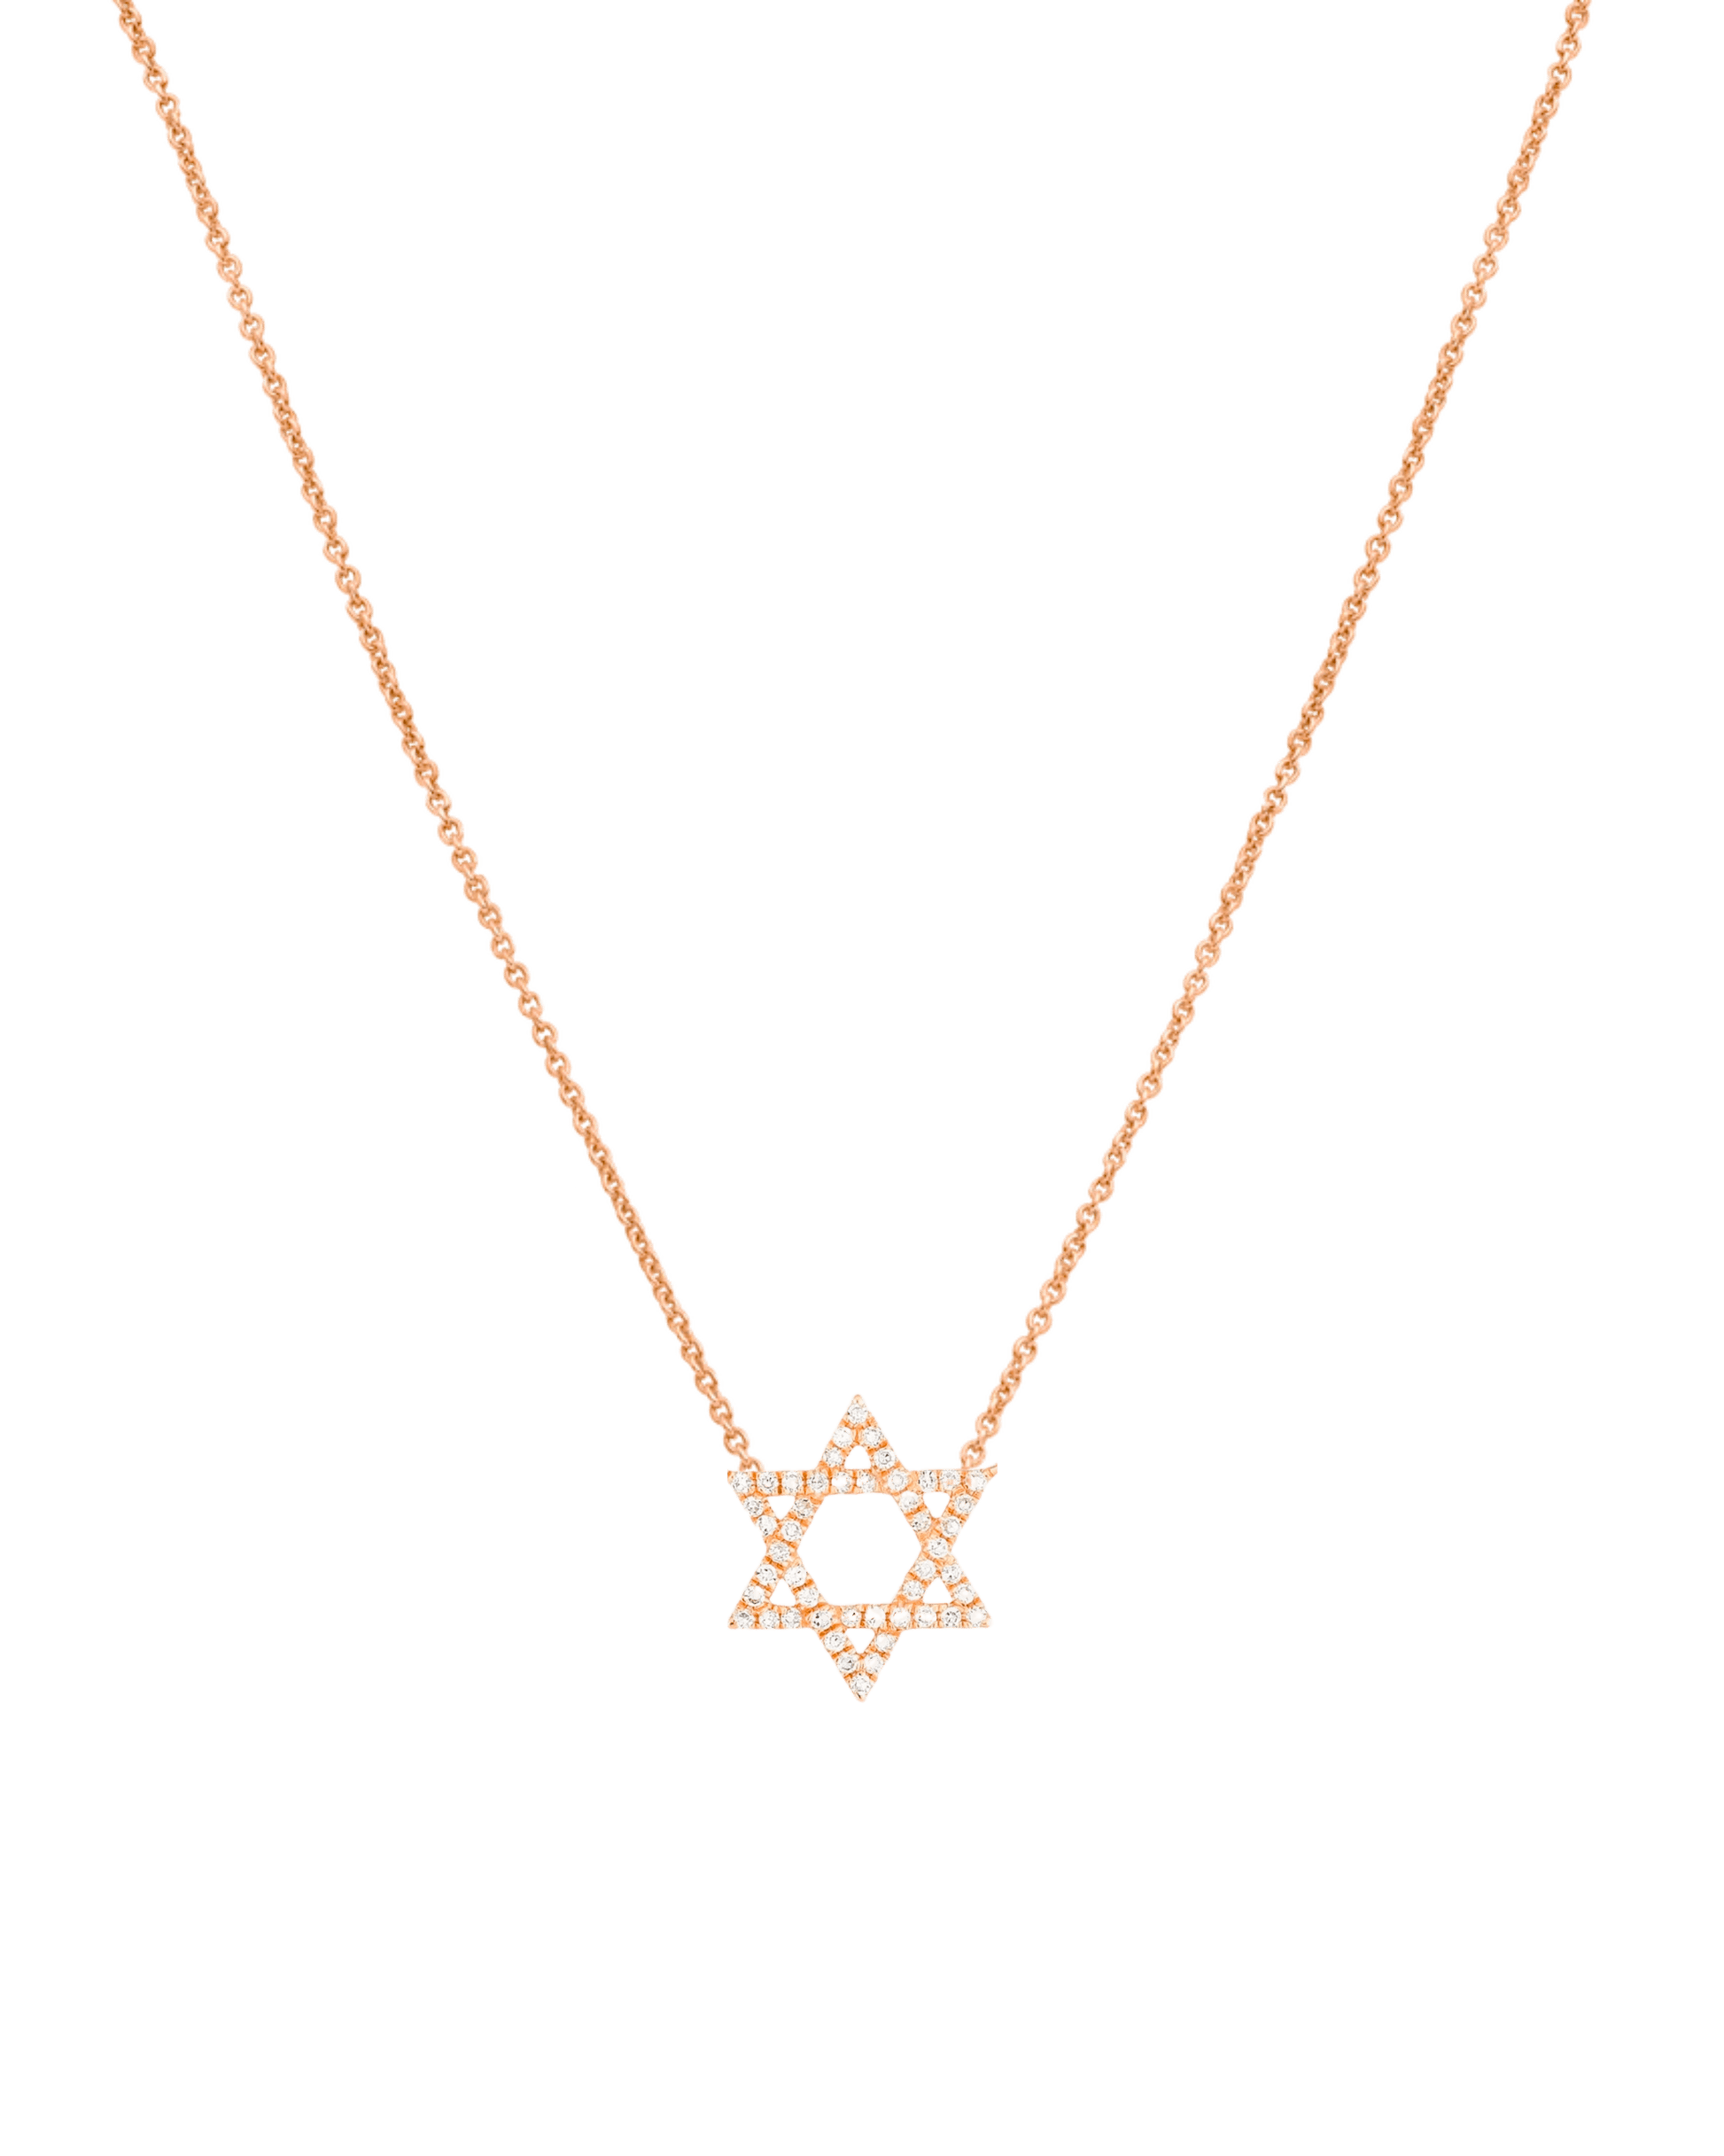 Star of David Necklace - 925 Sterling Silver Necklaces magal-dev 